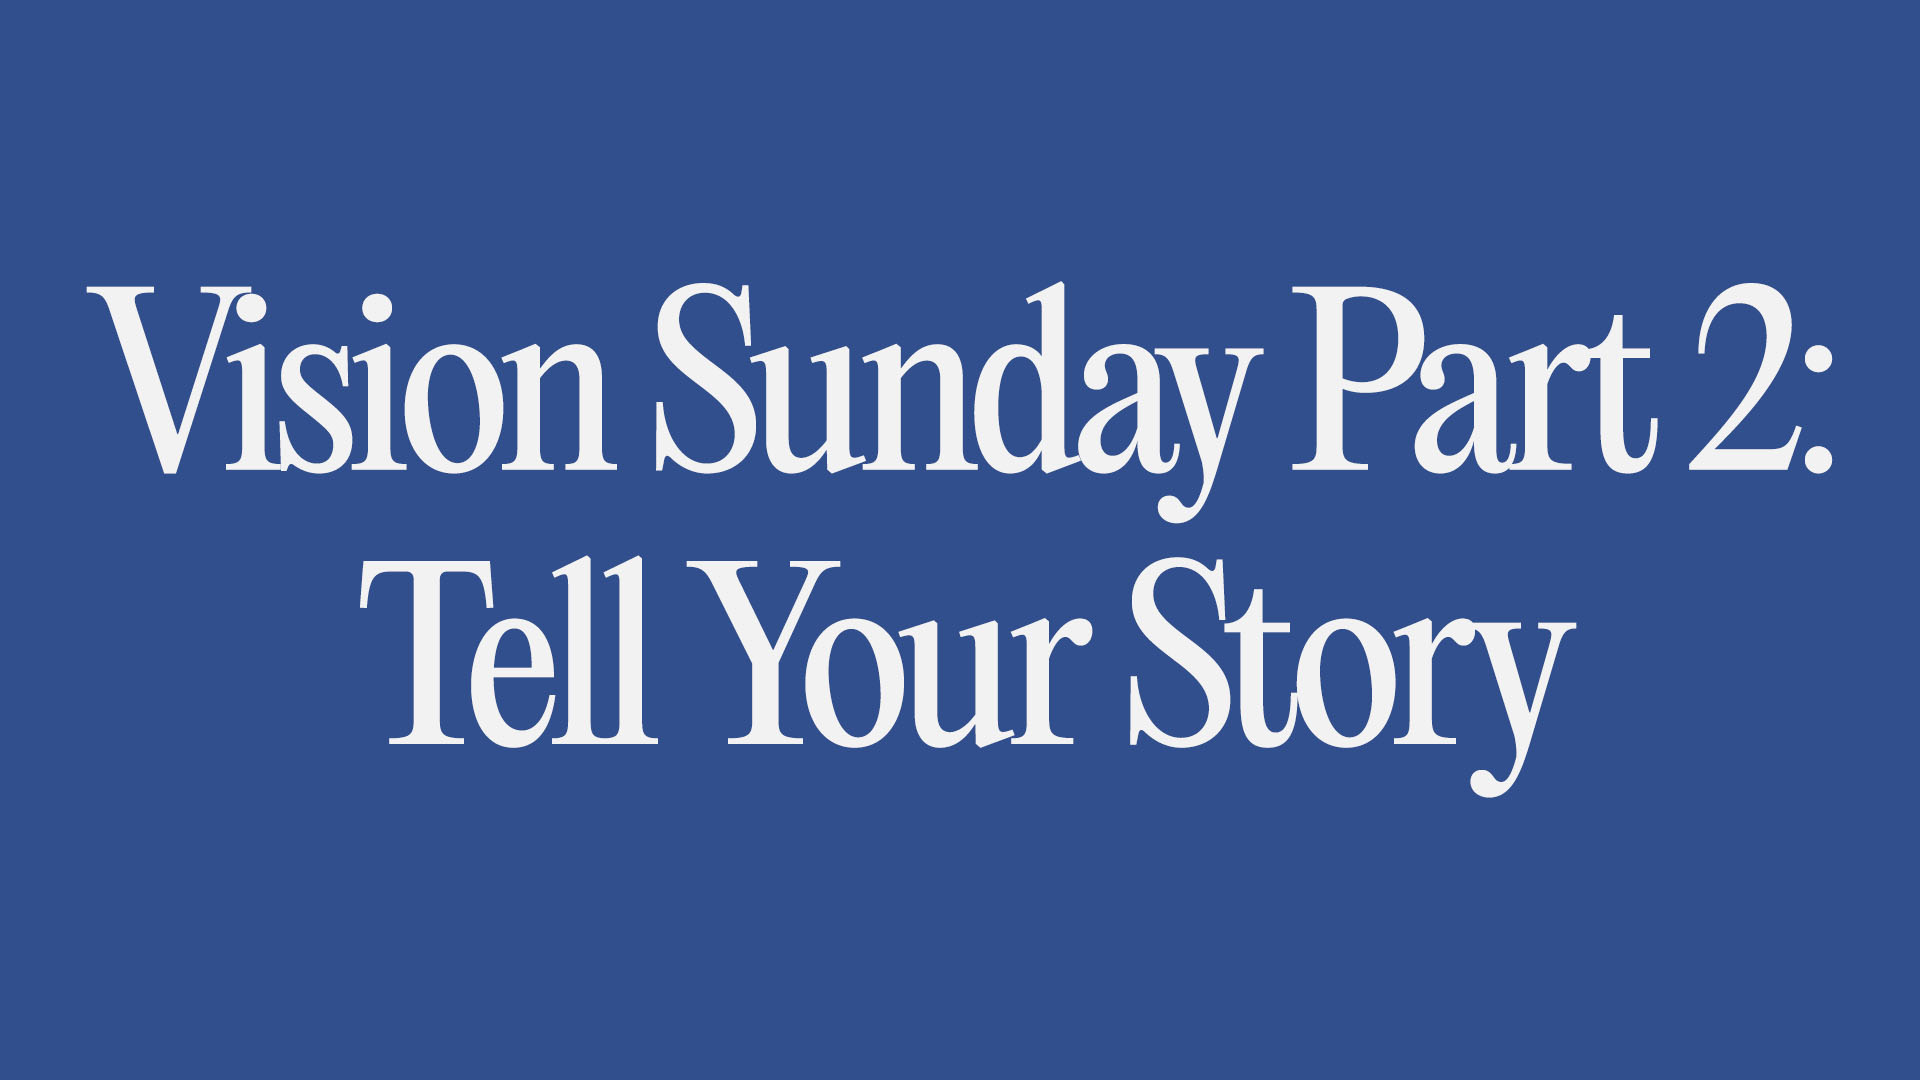 Vision Sunday Part 2: Tell Your Story Image